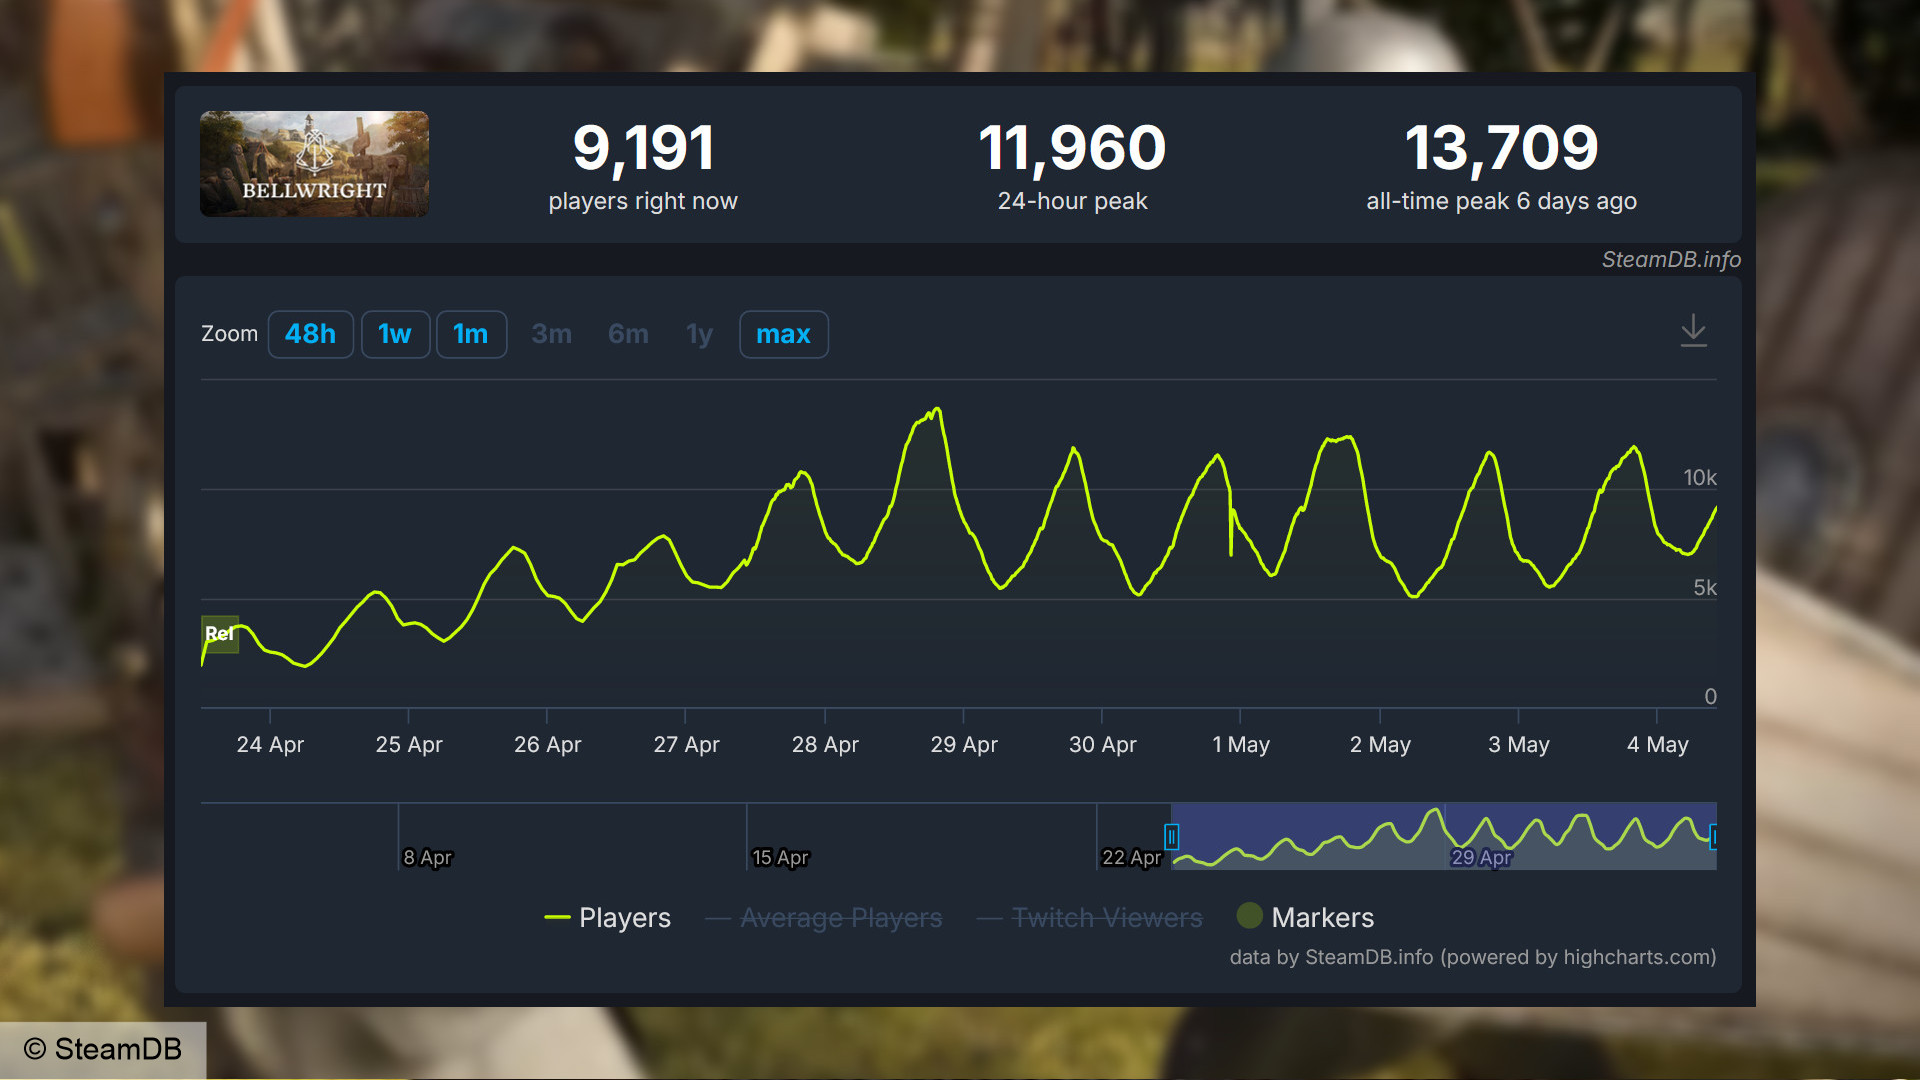 Bellwright Steam player count - Data from SteamDB showing increase over time to consistent player counts of over 11,000 concurrents.